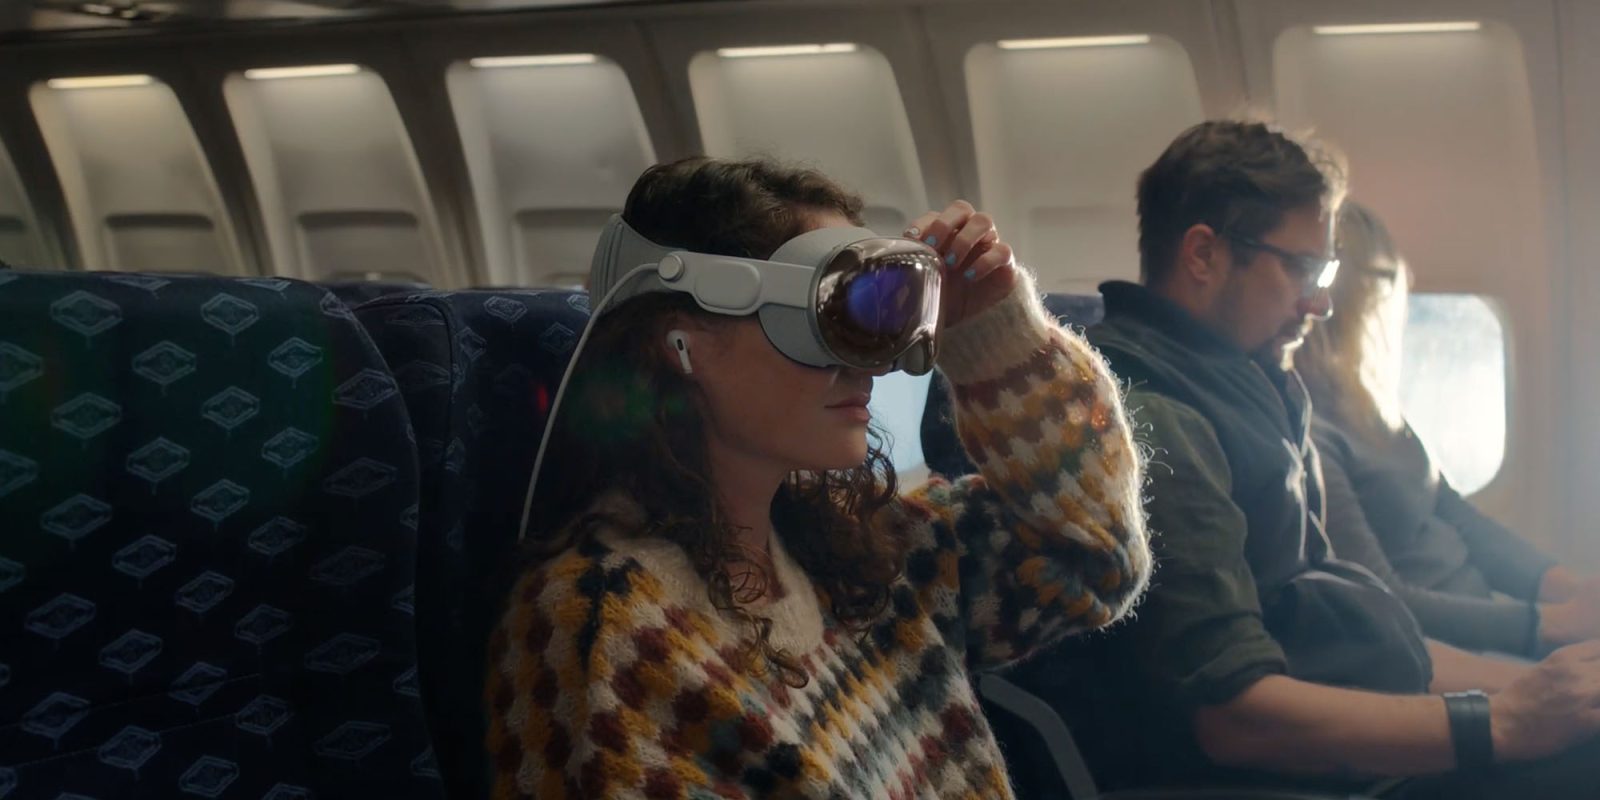 Vision Pro apps | Apple promo image on a plane